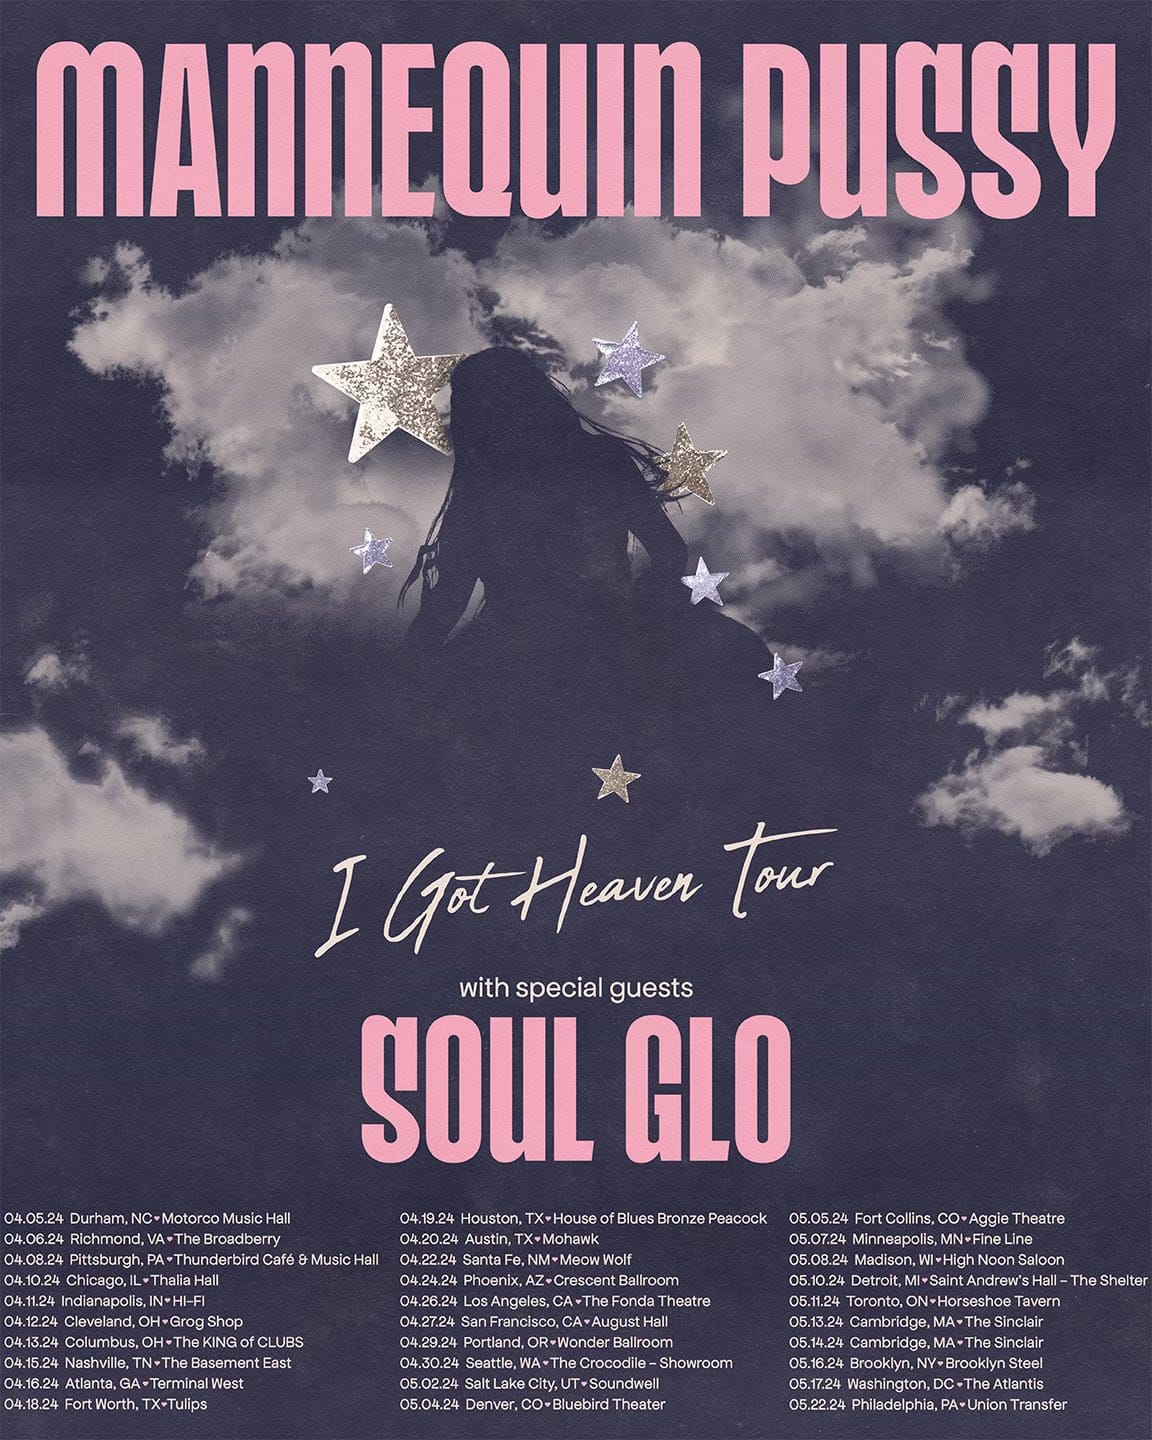 5 shows in 4 days: Mannequin Pussy, George Clanton, All 4 All, more